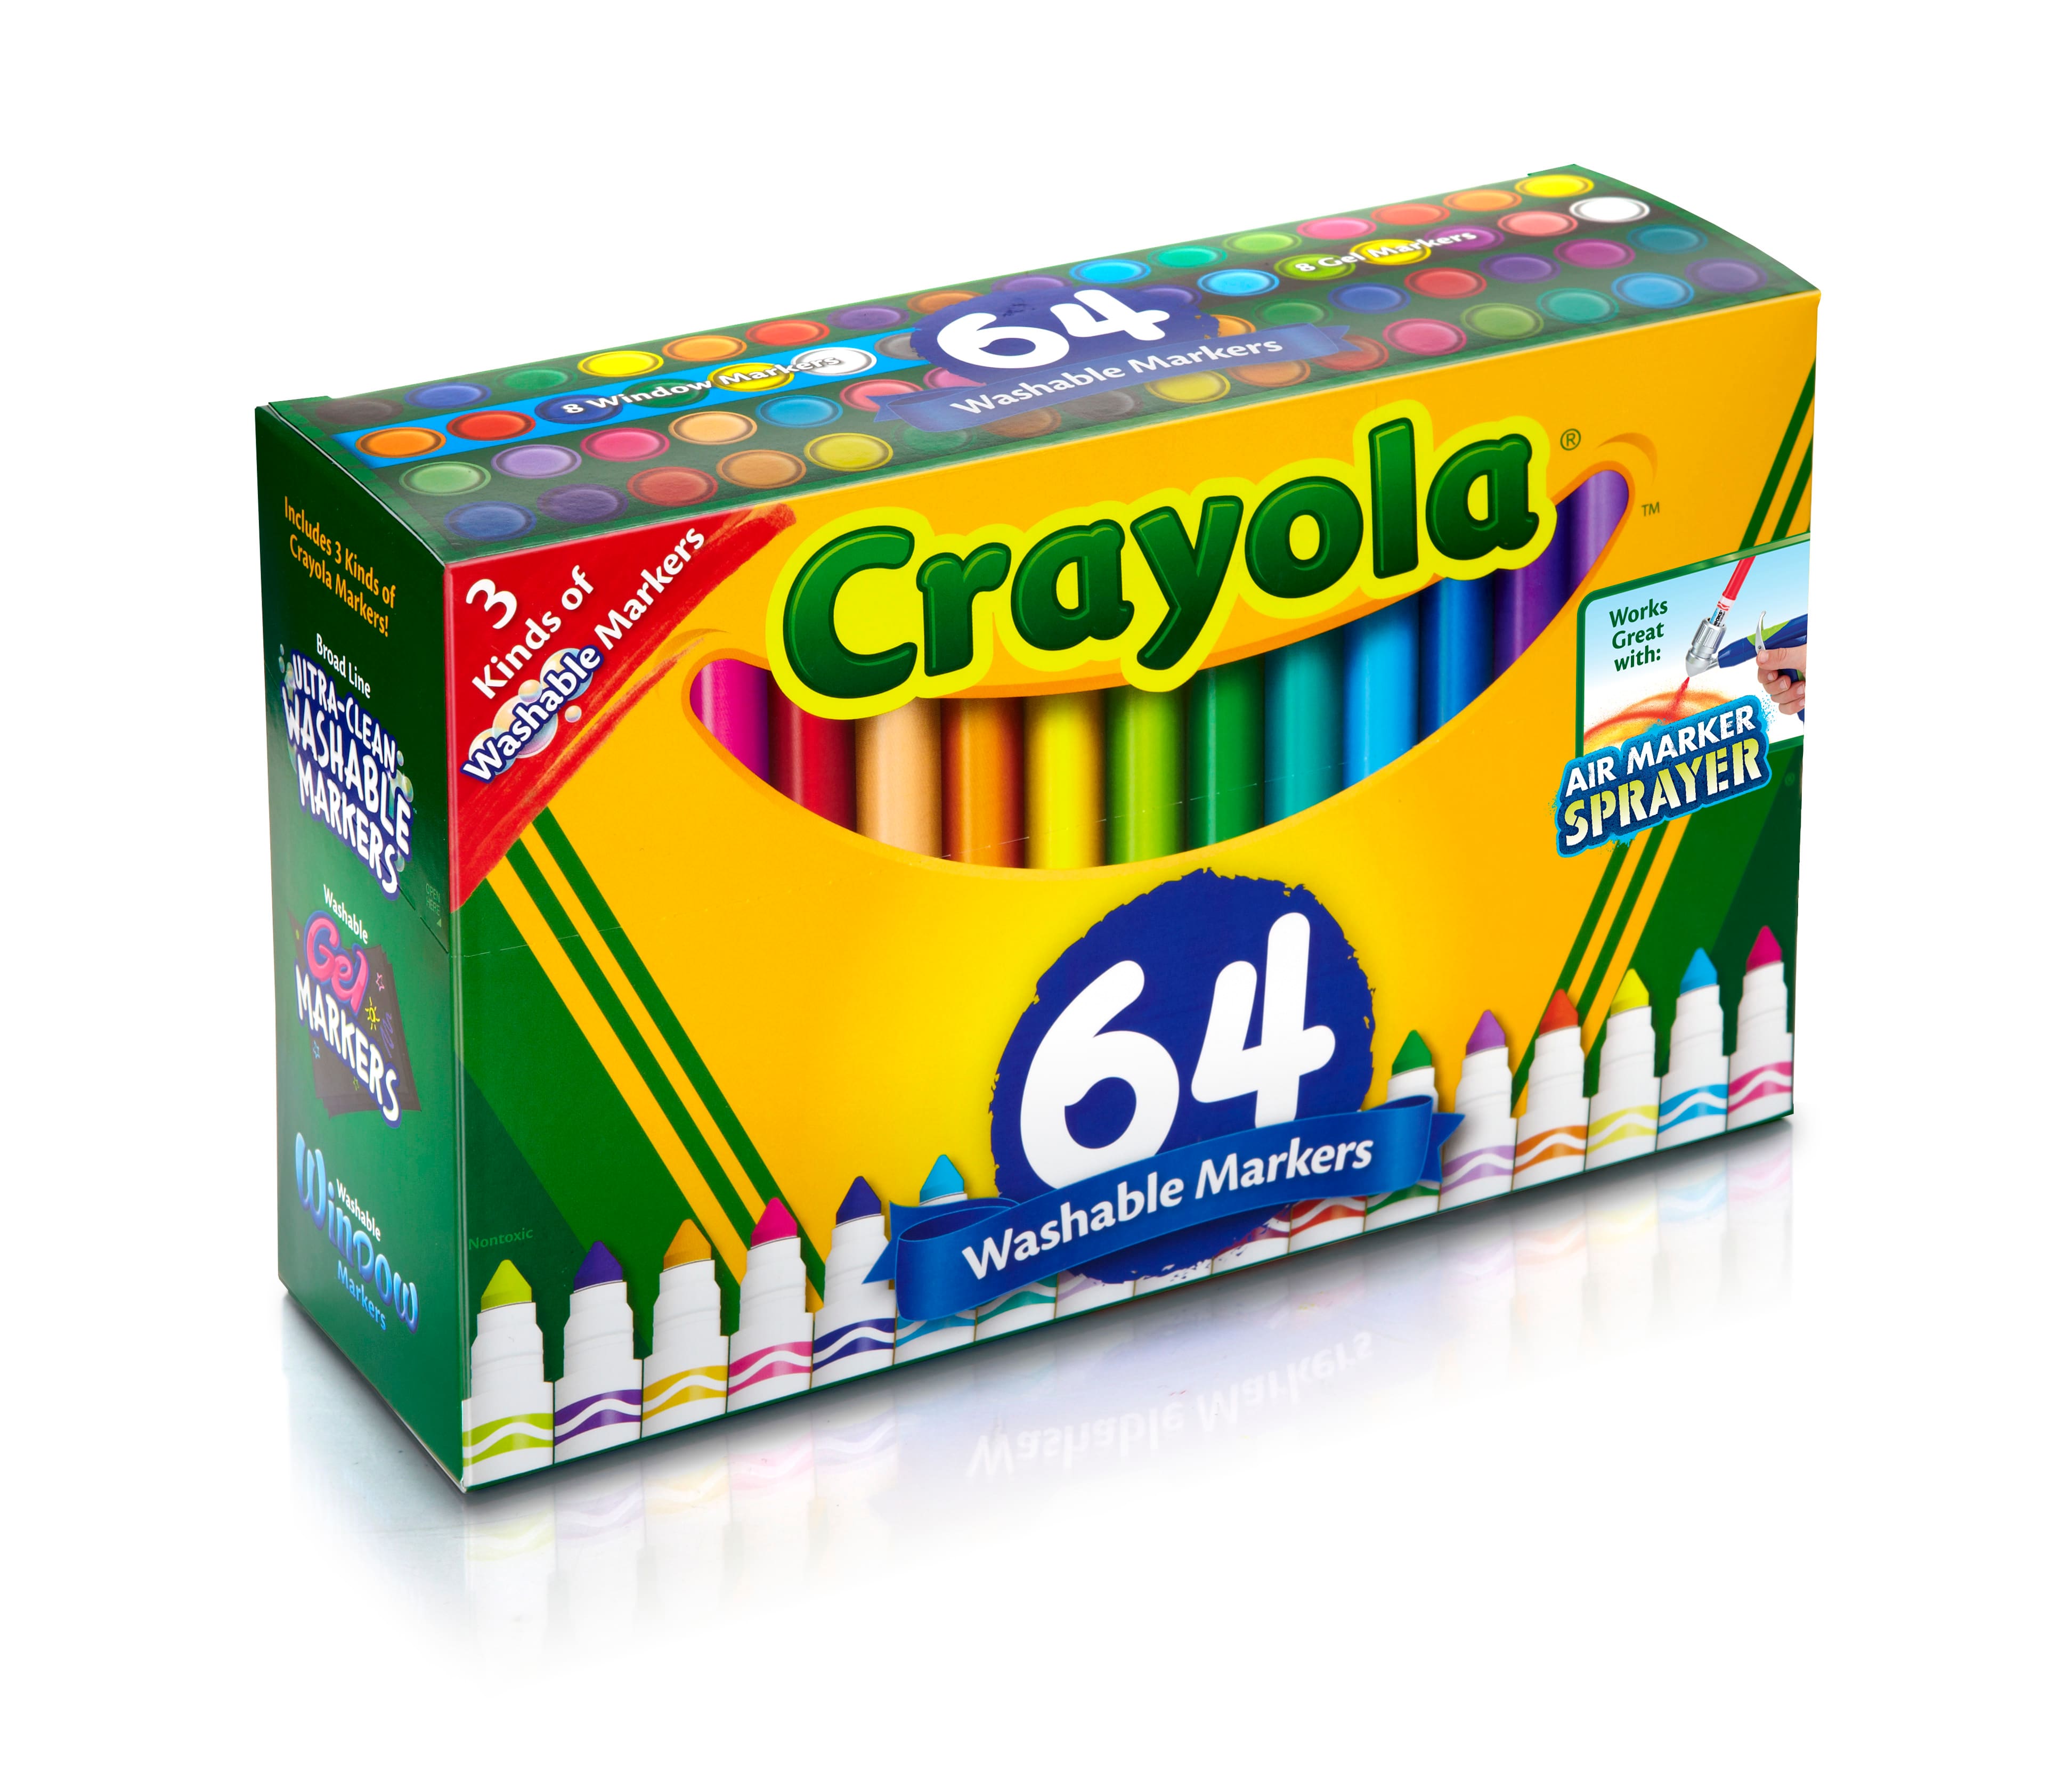  Crayola; Washable Window Markers; Art Tools; 8 Works on All  Glass Surfaces [Set of 3] : Toys & Games